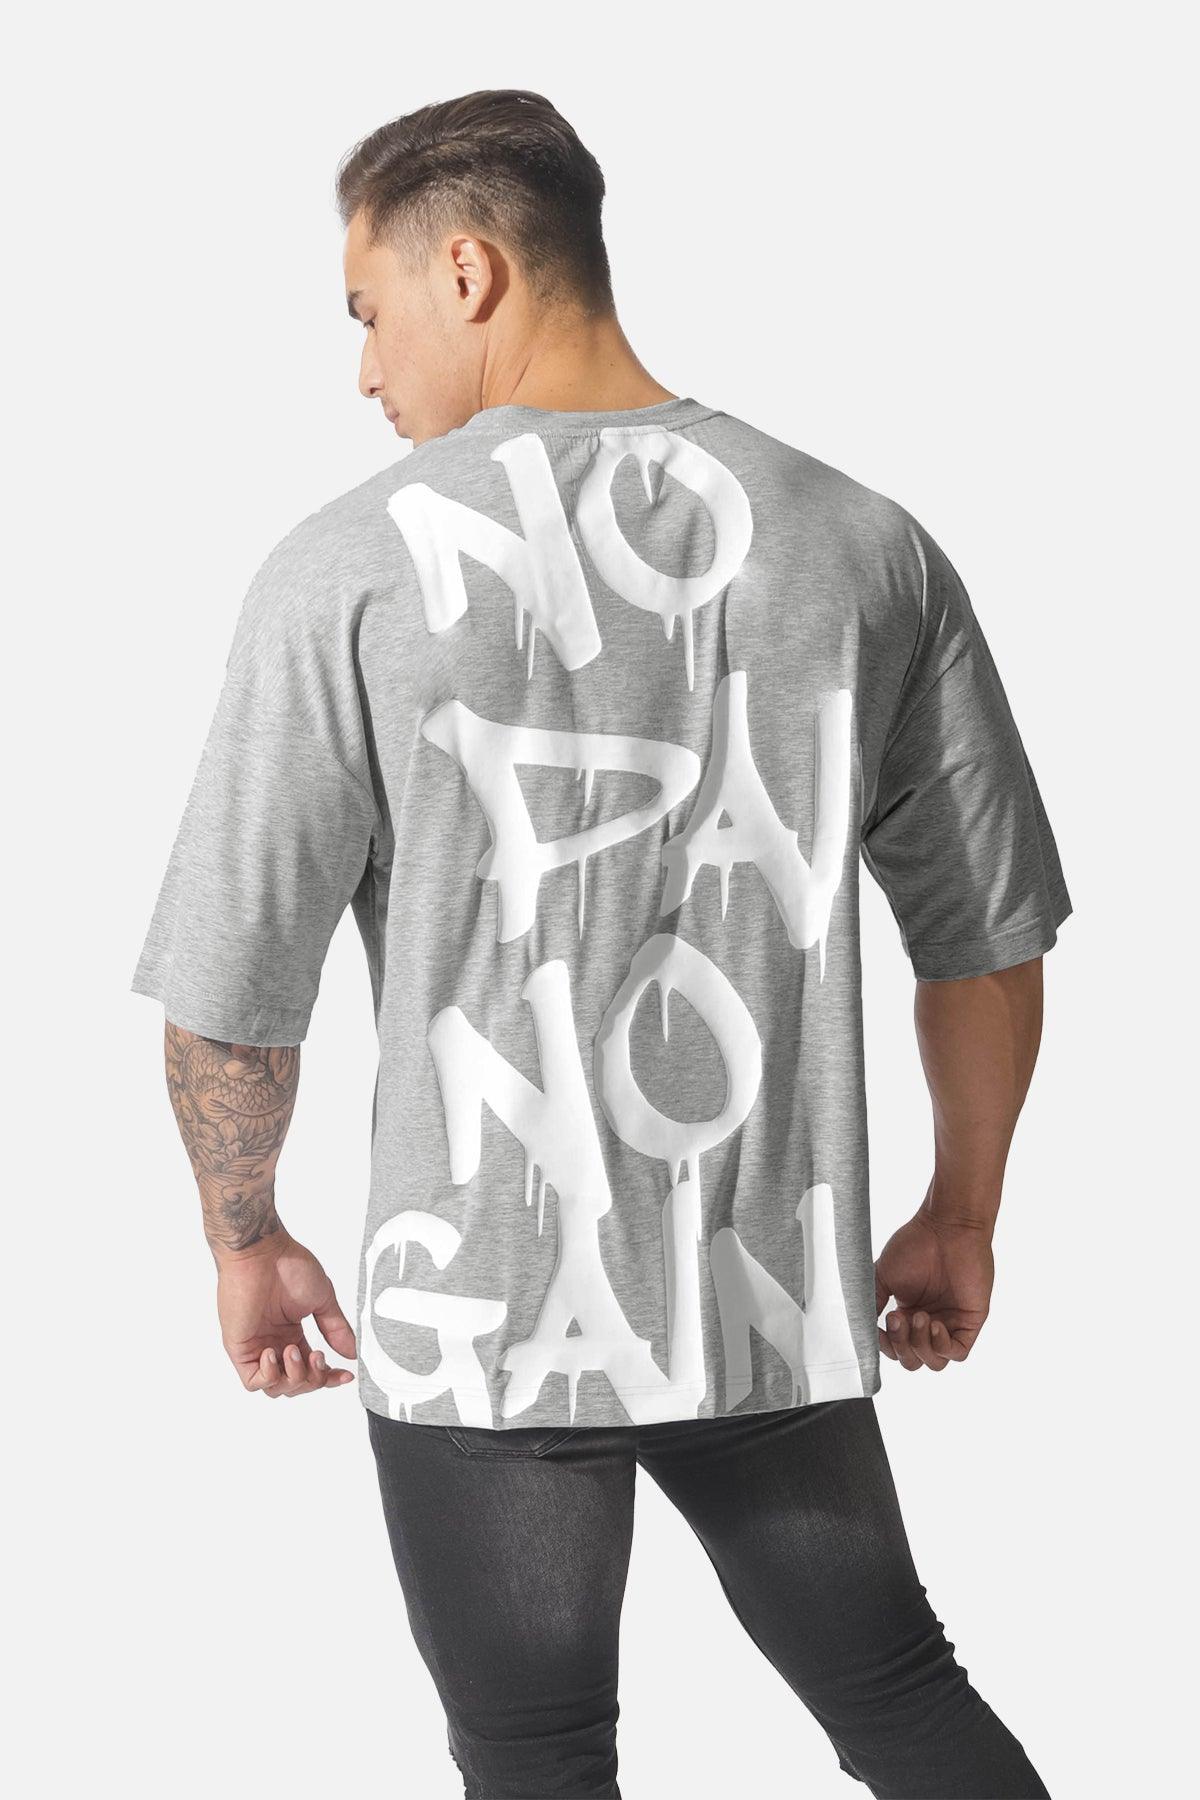 Energy Oversized T-Shirt - No Pain No Gain - Jed North